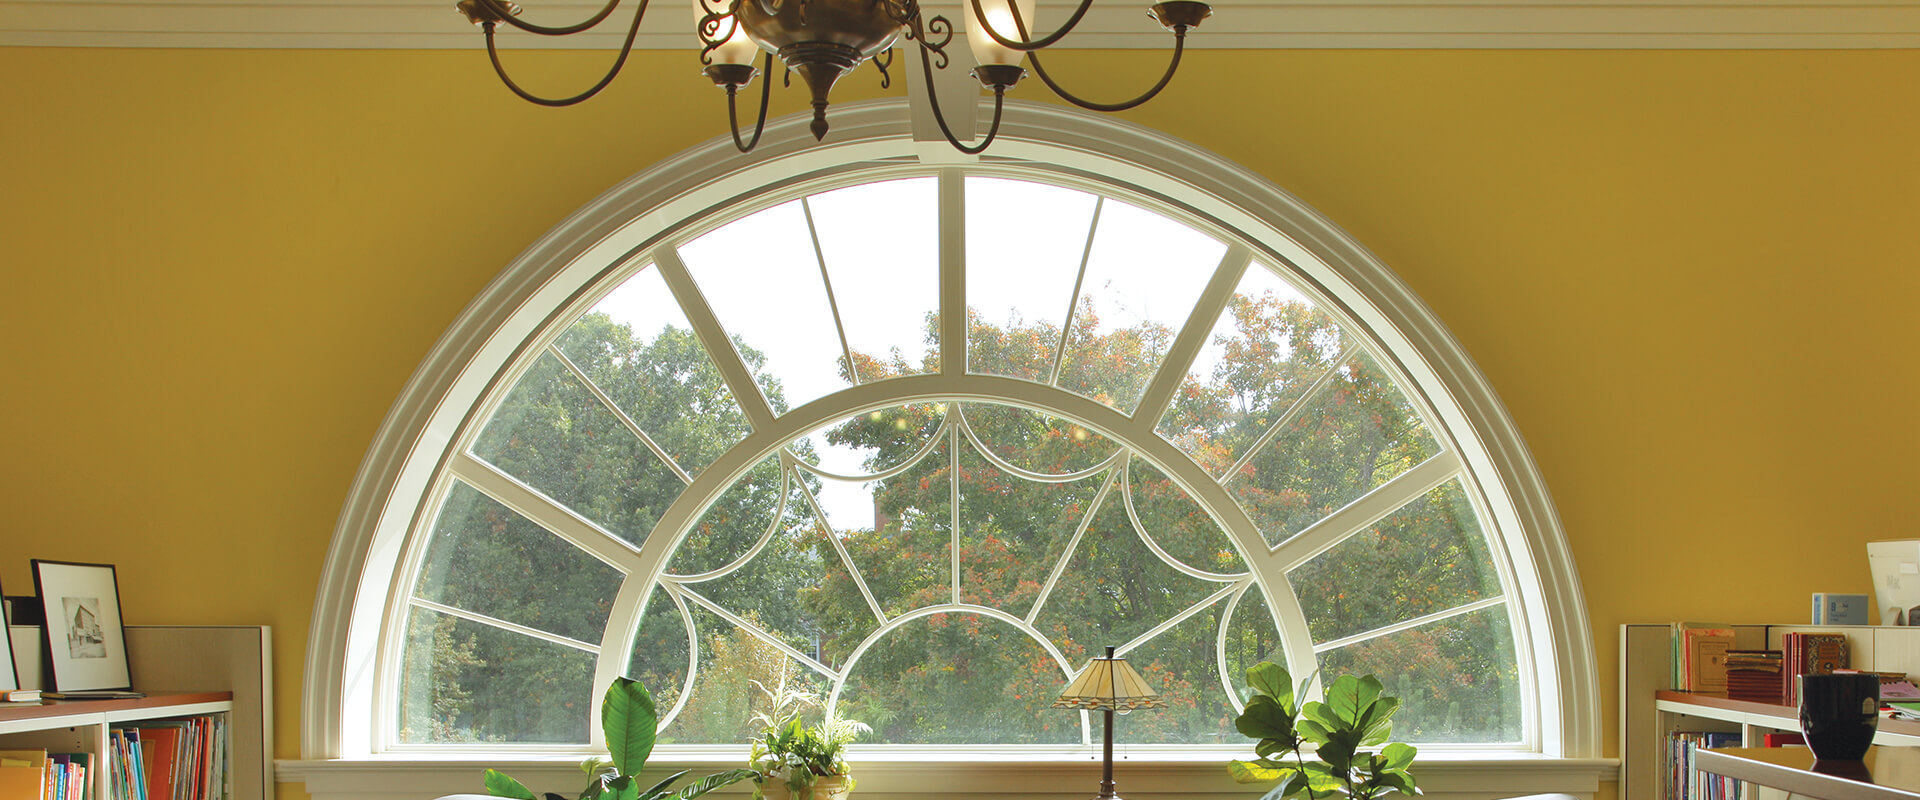 10 Stunning Arched Window Home Design Ideas